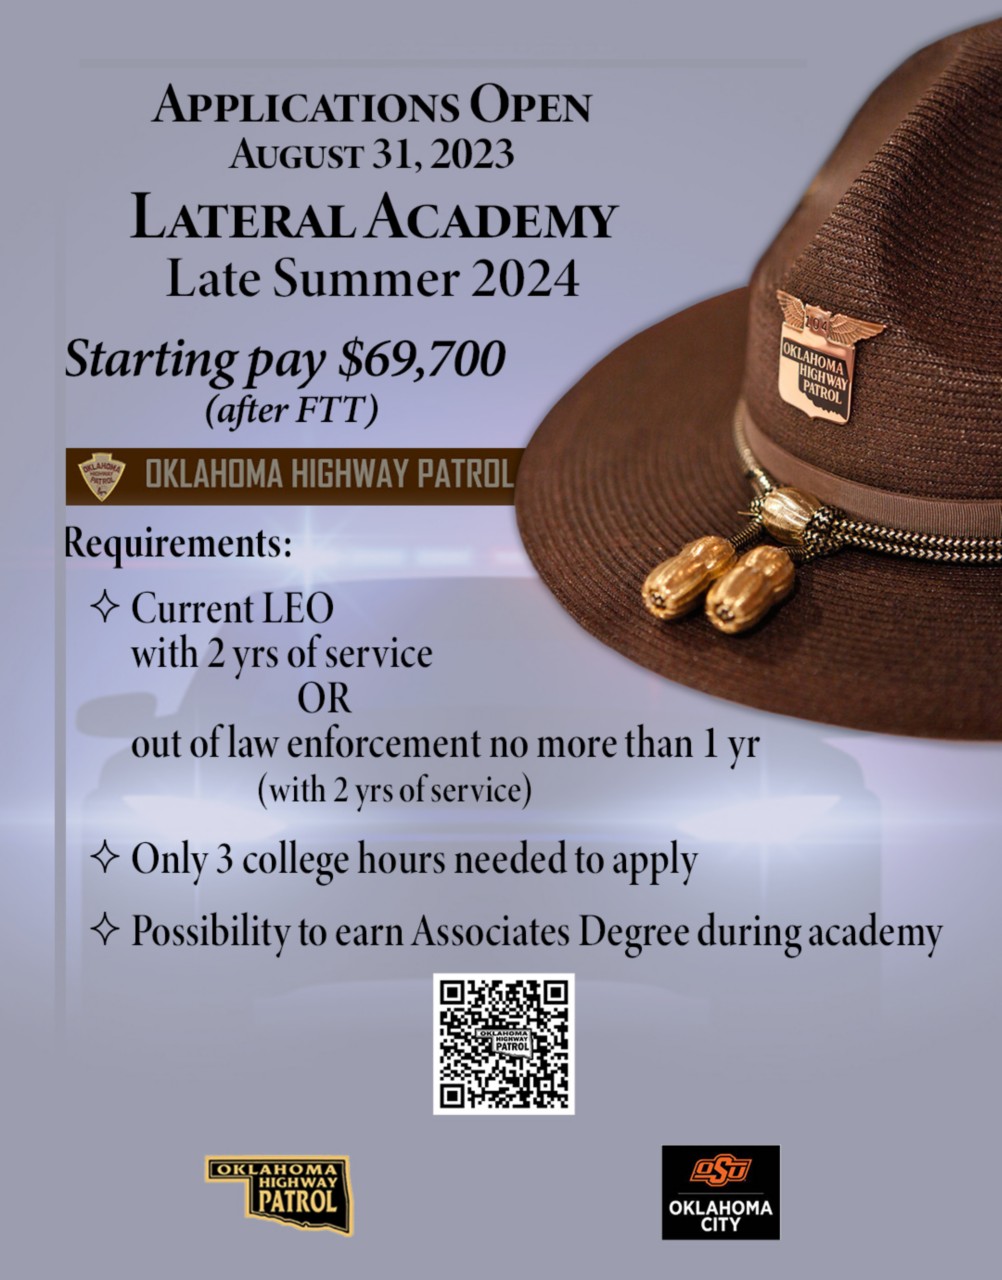 OHP Lateral Academy applications open August 31, 2023 flyer